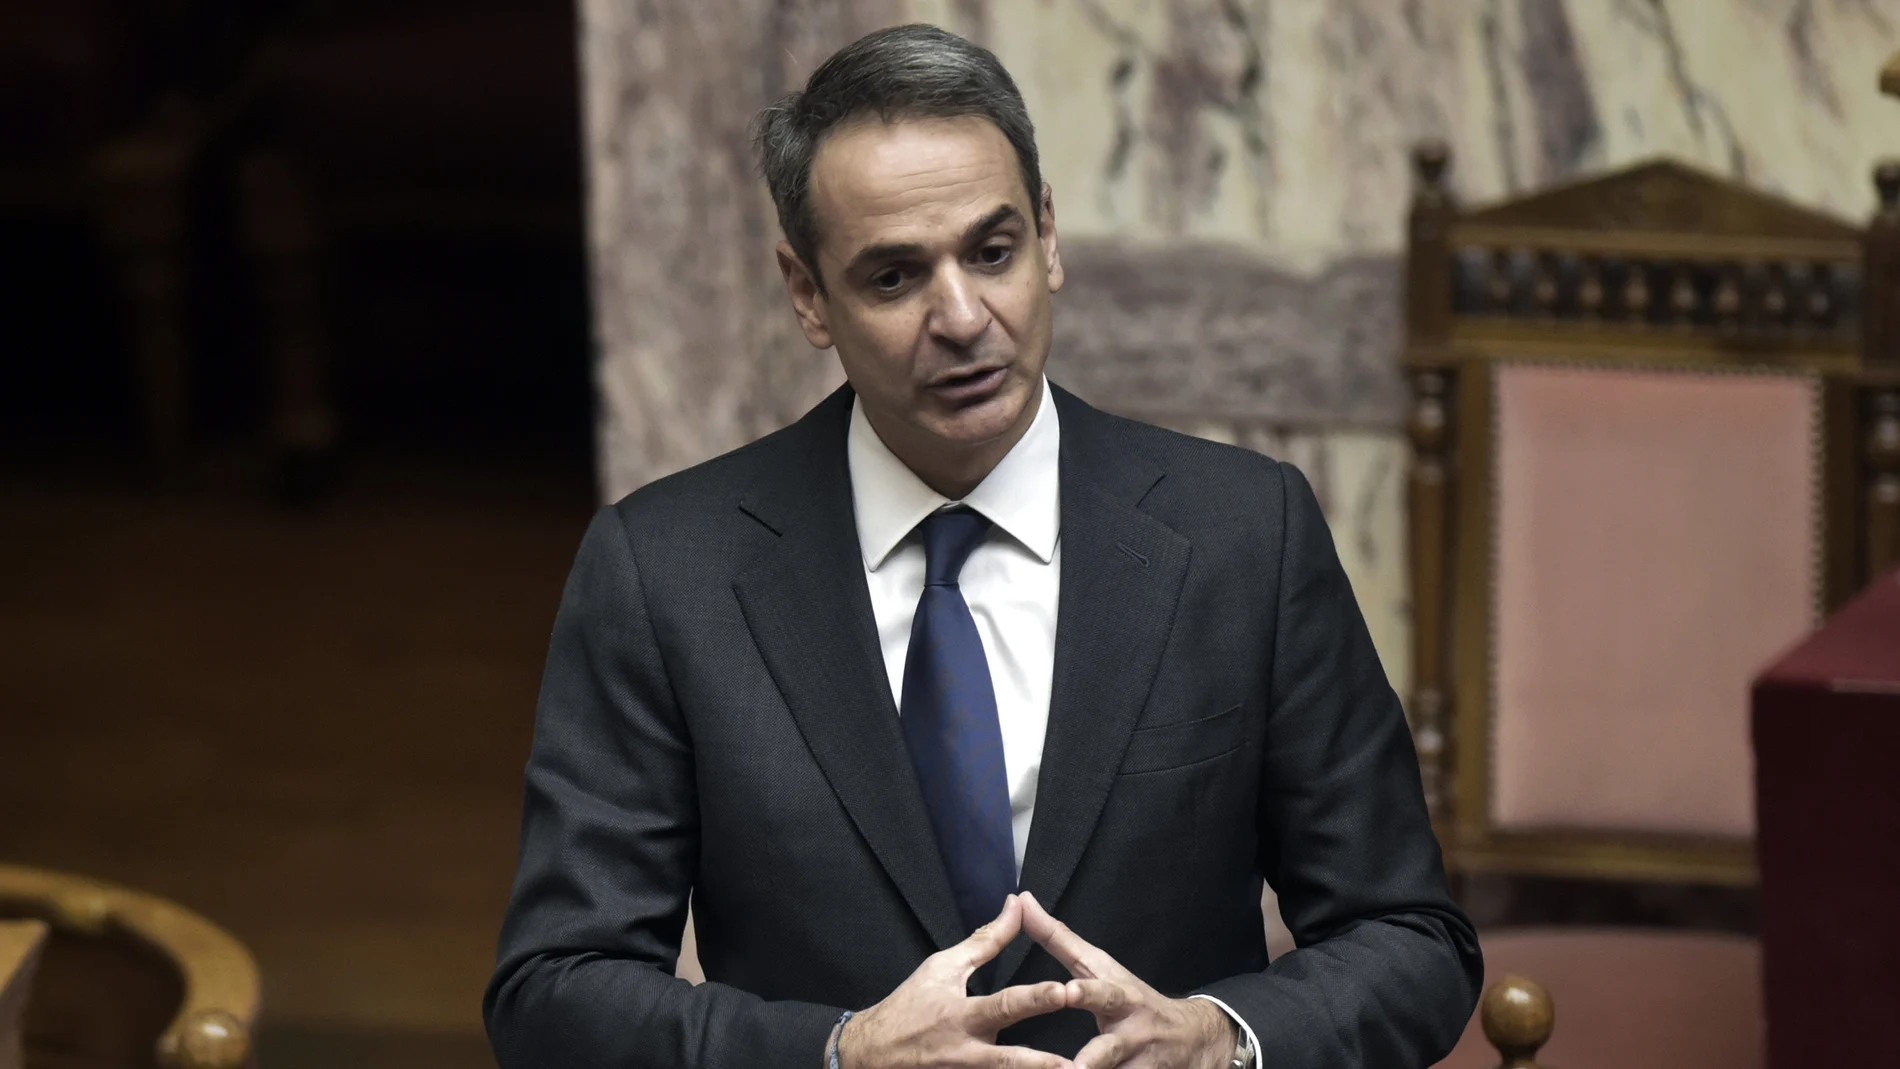 Greece's Prime Minister Kyriakos Mitsotakis speaks during a Parliament debate in Athens, Wednesday, Jan. 20, 2021. Lawmakers in Greece are set to approve legislation to extend the country's territorial waters along its western coastline from six to 12 nautical miles. (Giorgos Zachos/InTime News via AP)